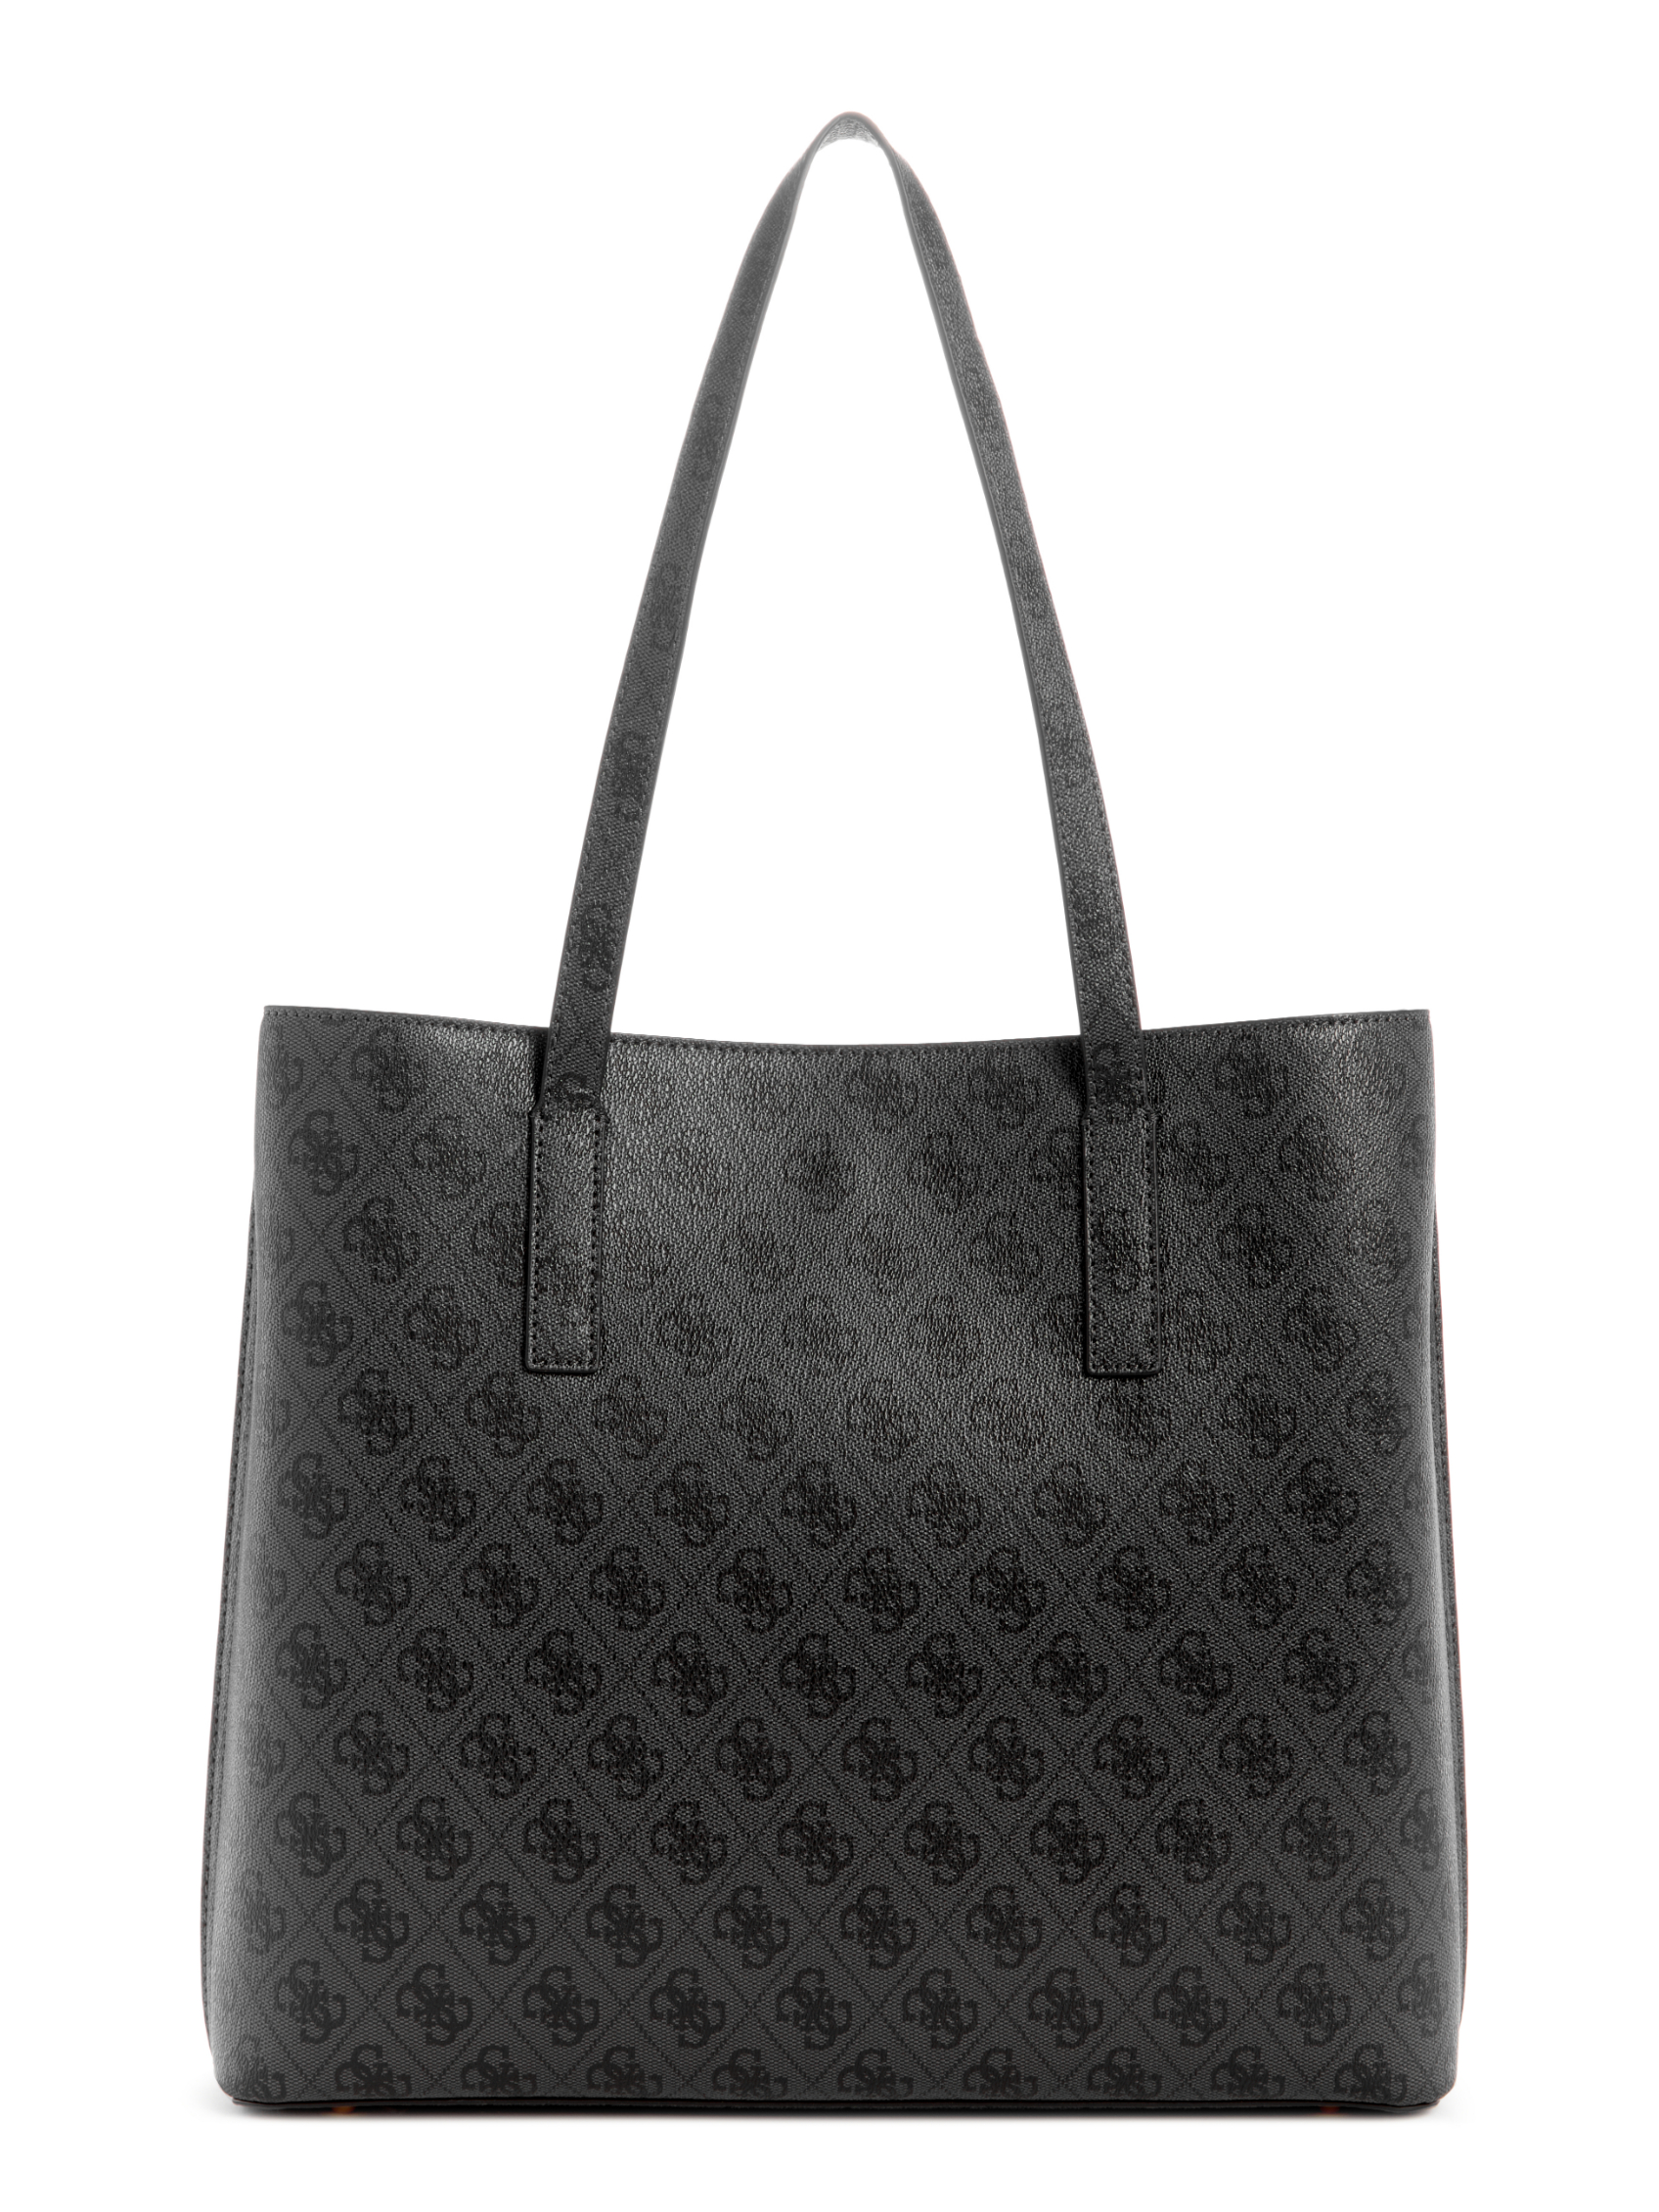 MERIDIAN QUATTRO G GIRLFRIEND TOTE | Guess Philippines